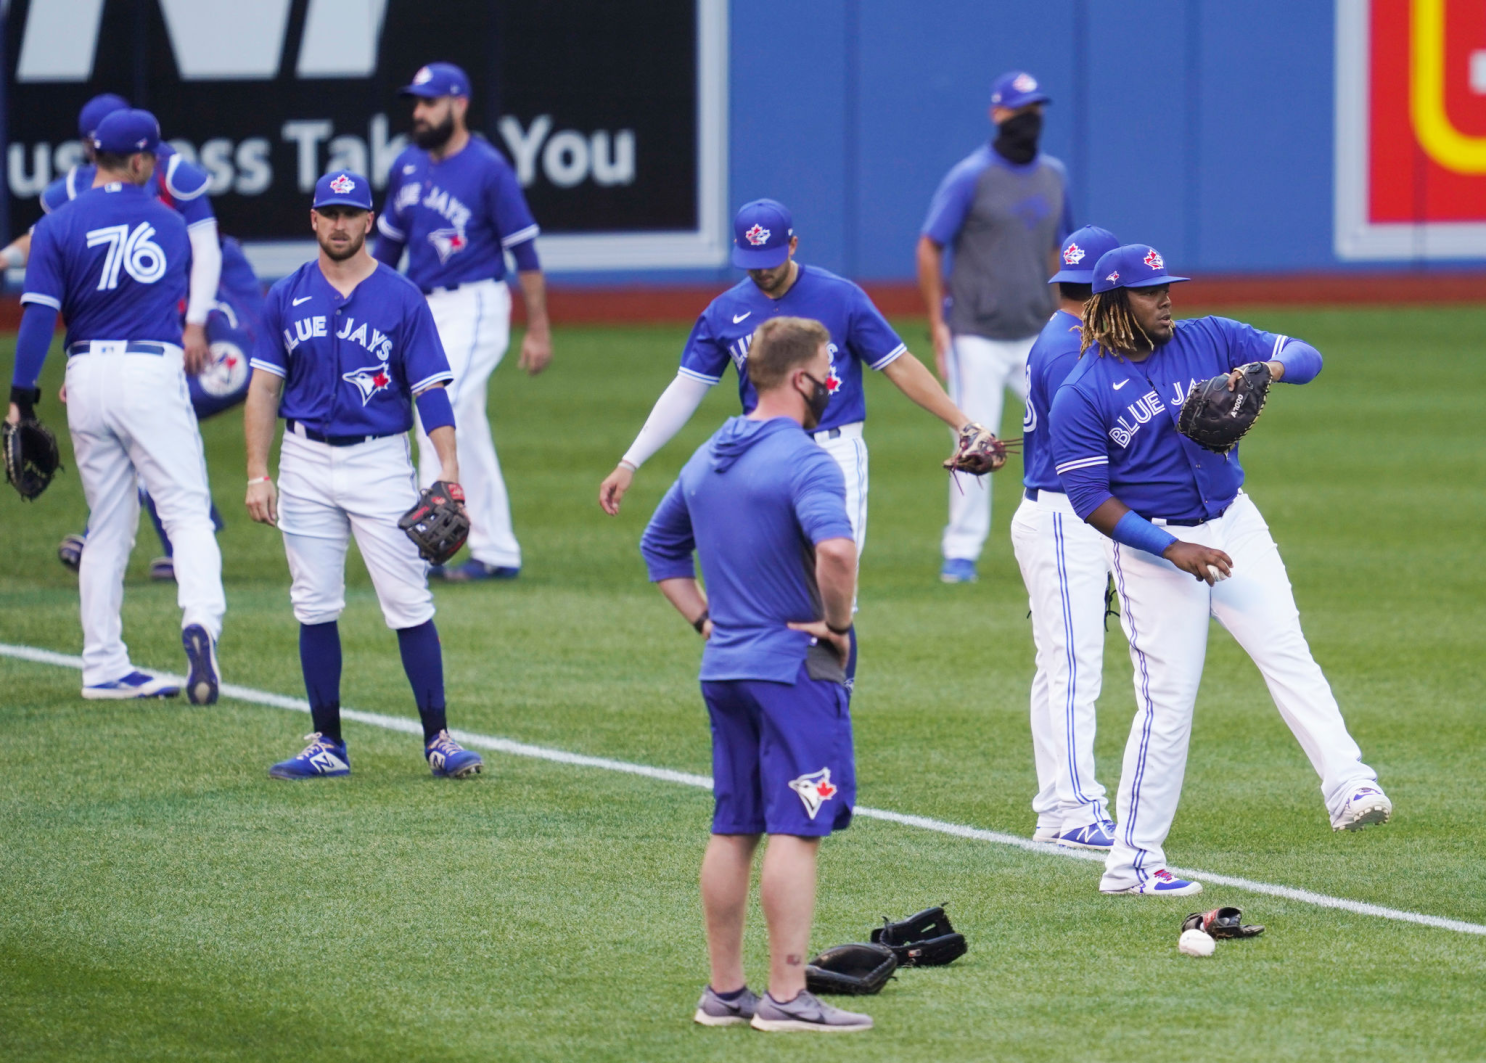 Toronto Blue Jays to play 2020 home games in Buffalo - Sports Illustrated